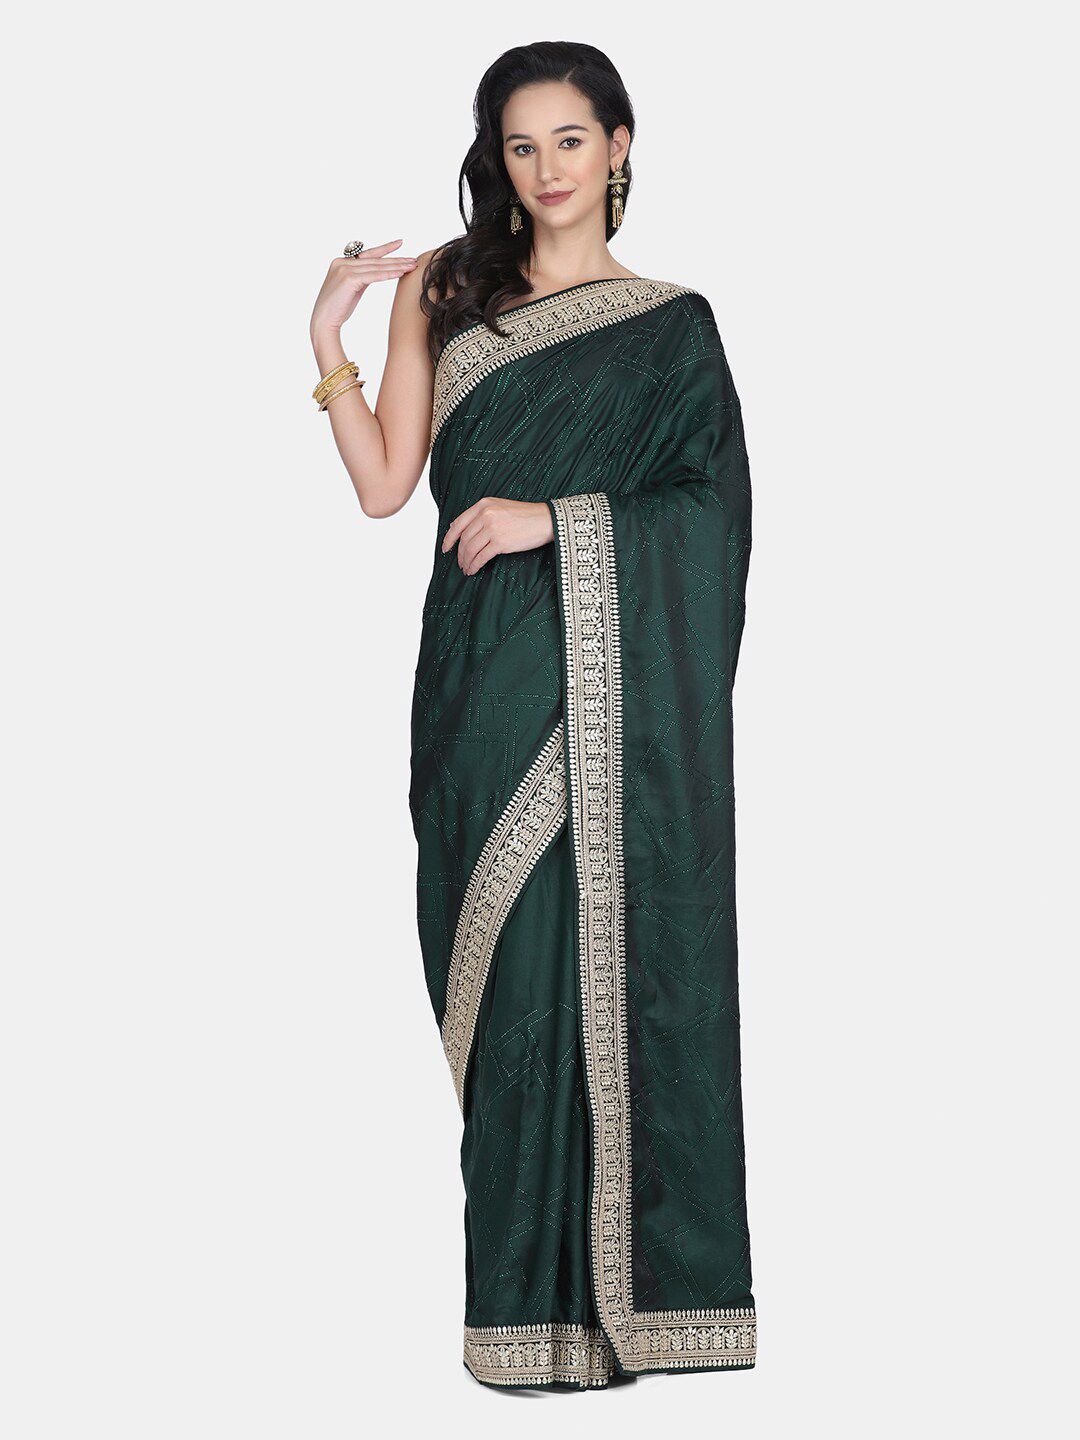 BOMBAY SELECTIONS Green & White Woven Design Pure Crepe Saree Price in India